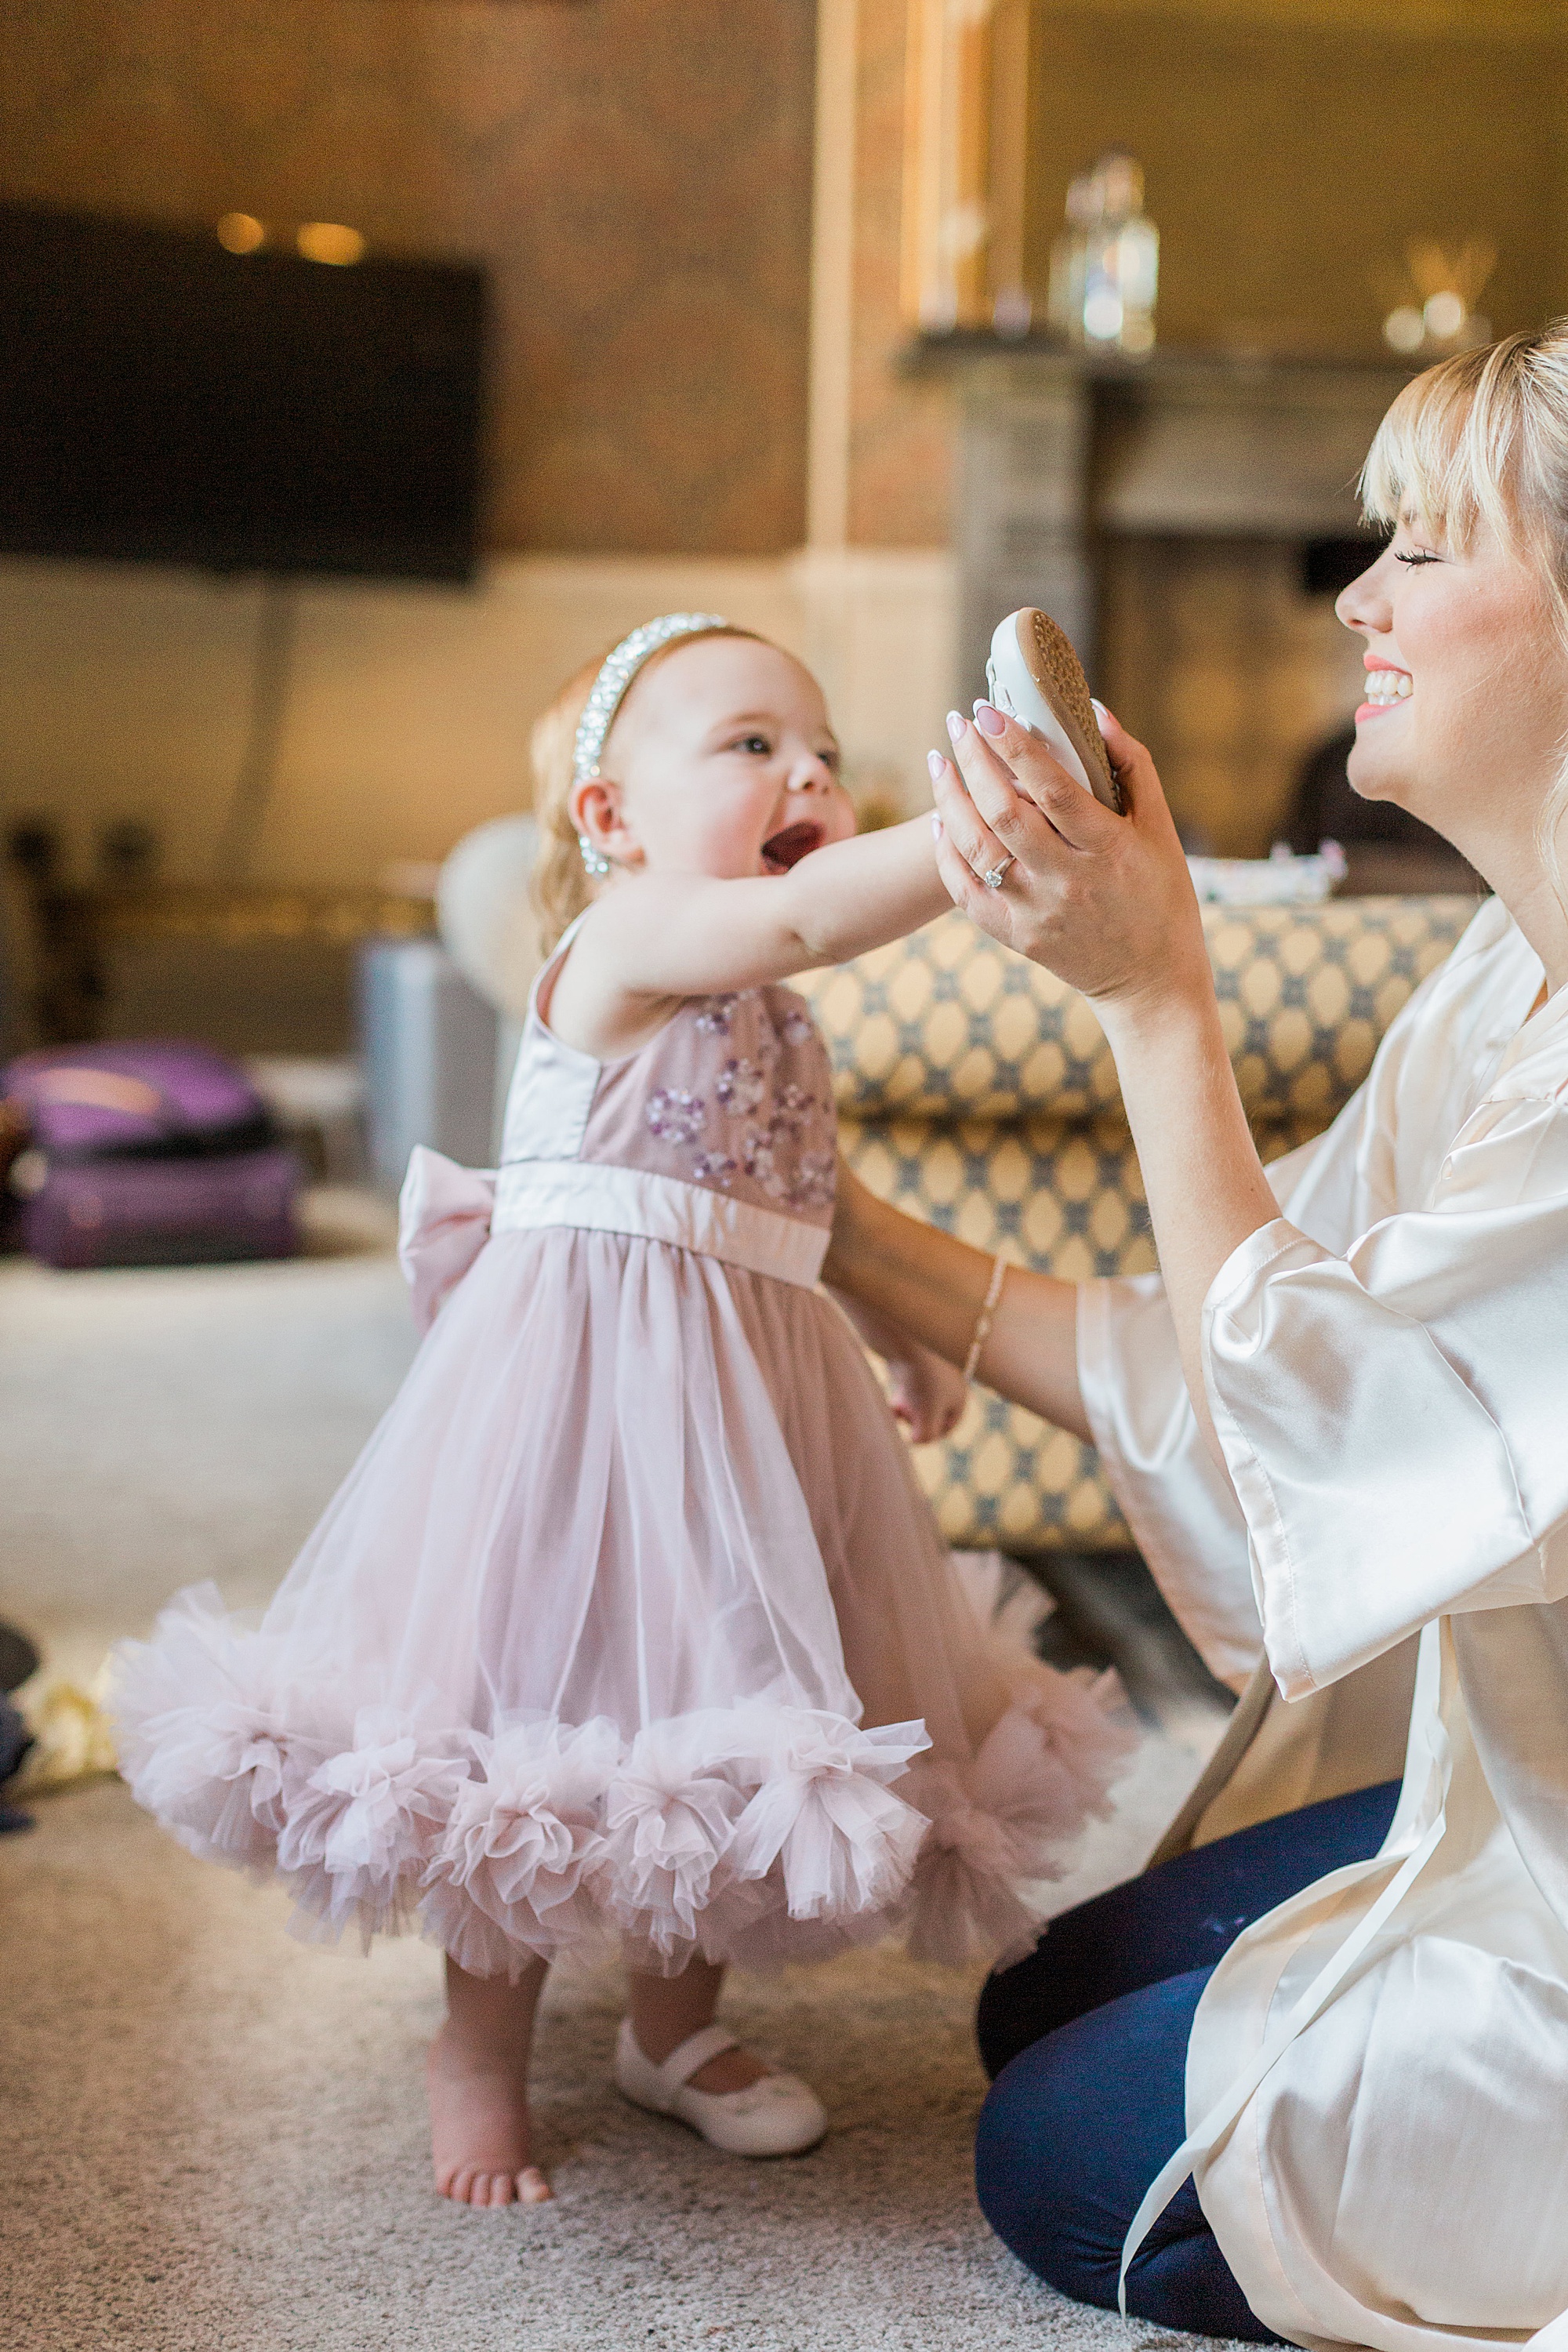 Photo of a bride helping her toddler daughter get dressed with smiles between them